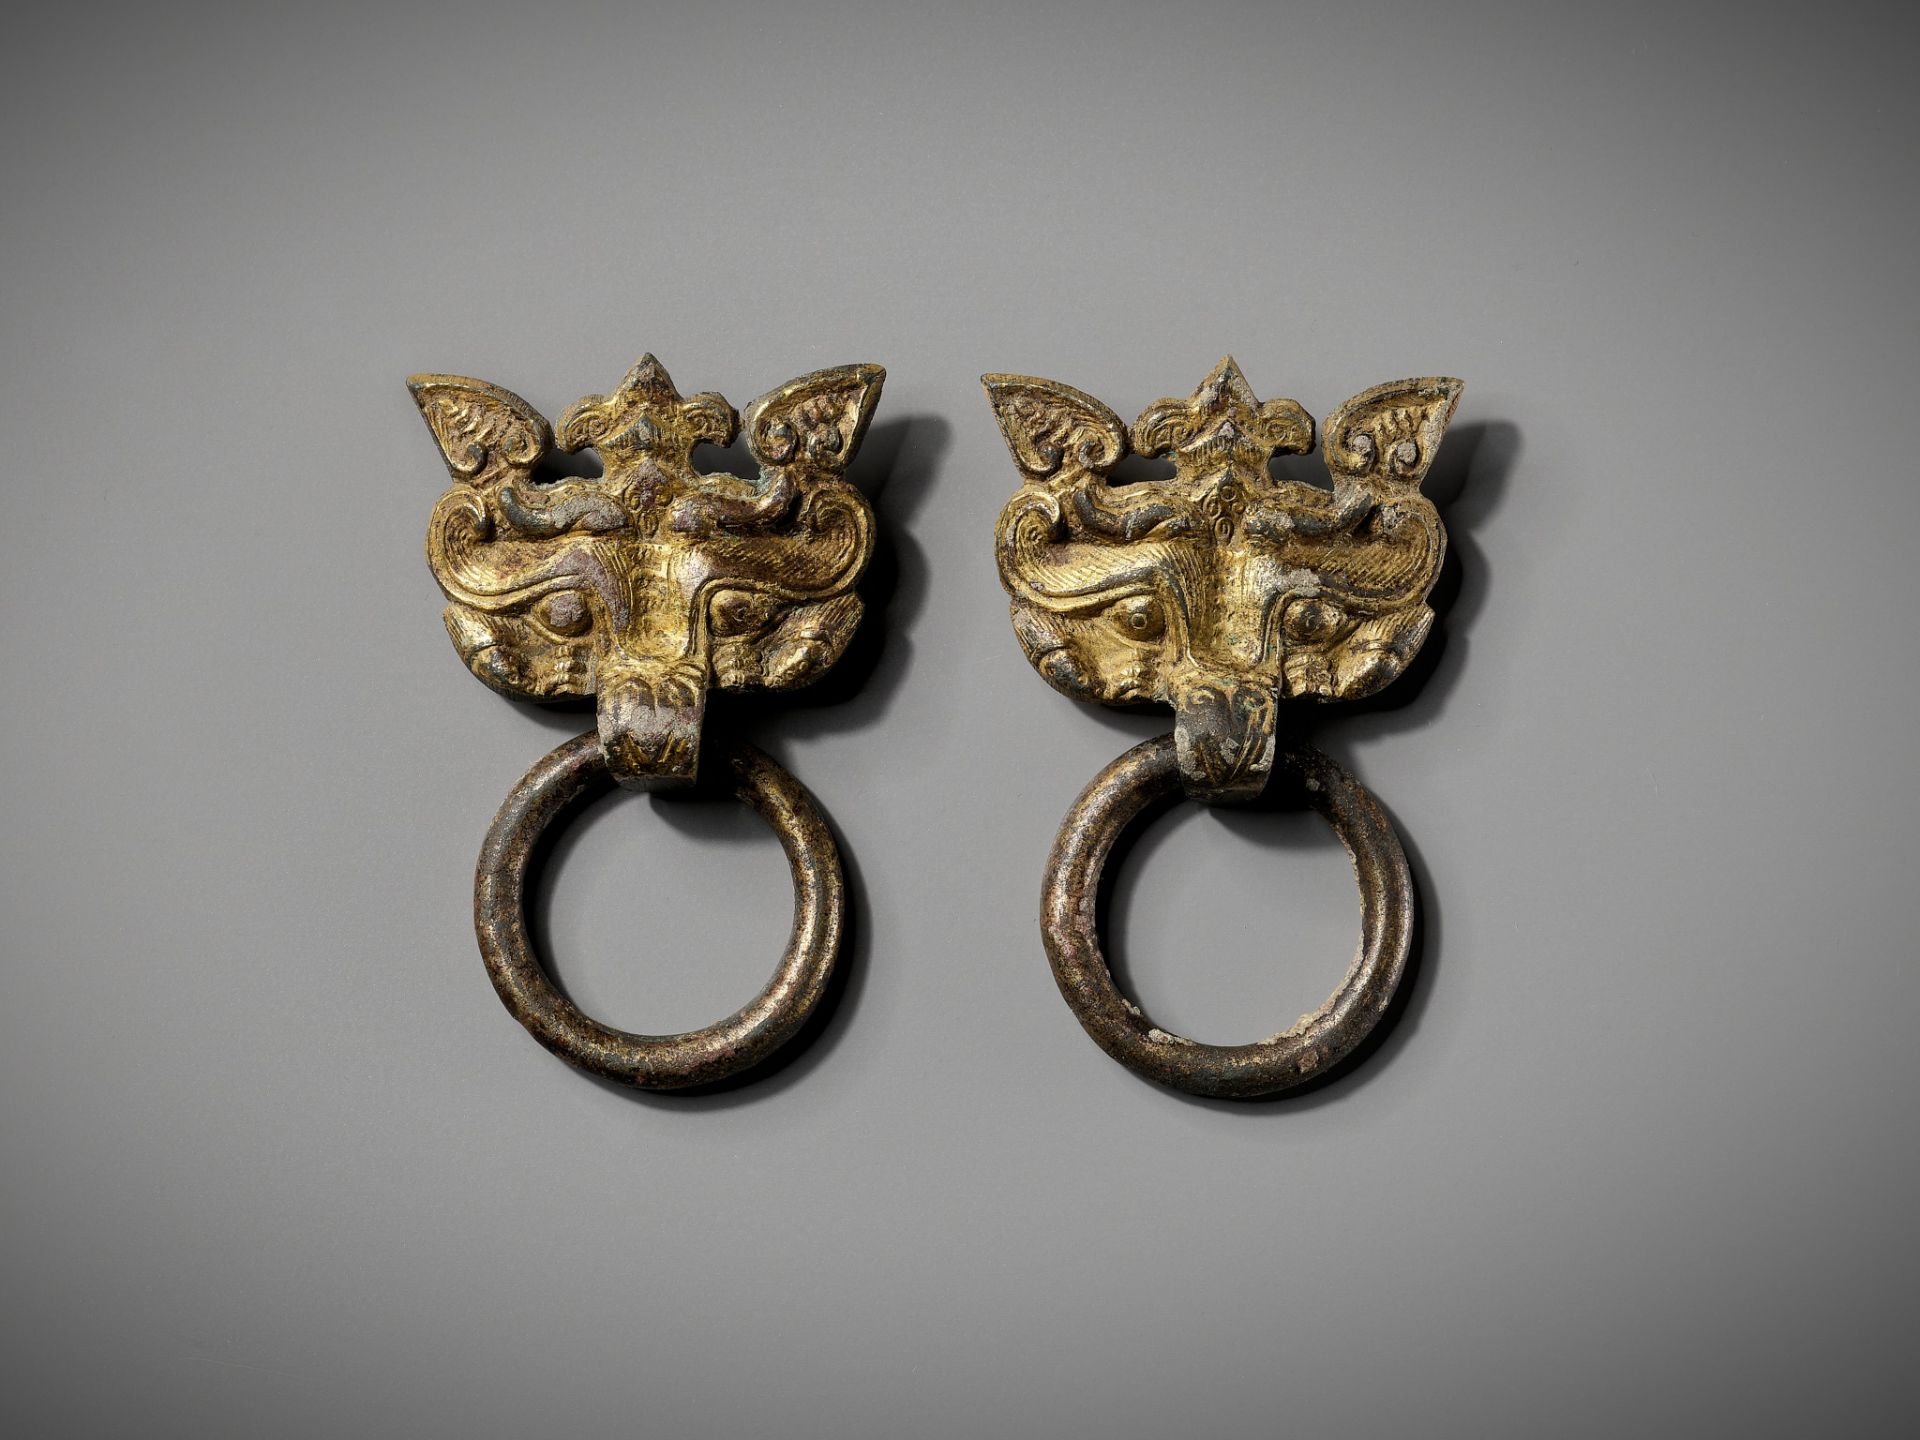 A PAIR OF GILT-BRONZE TAOTIE MASKS WITH RING HANDLES, WARRING STATES TO HAN DYNASTY - Image 9 of 11